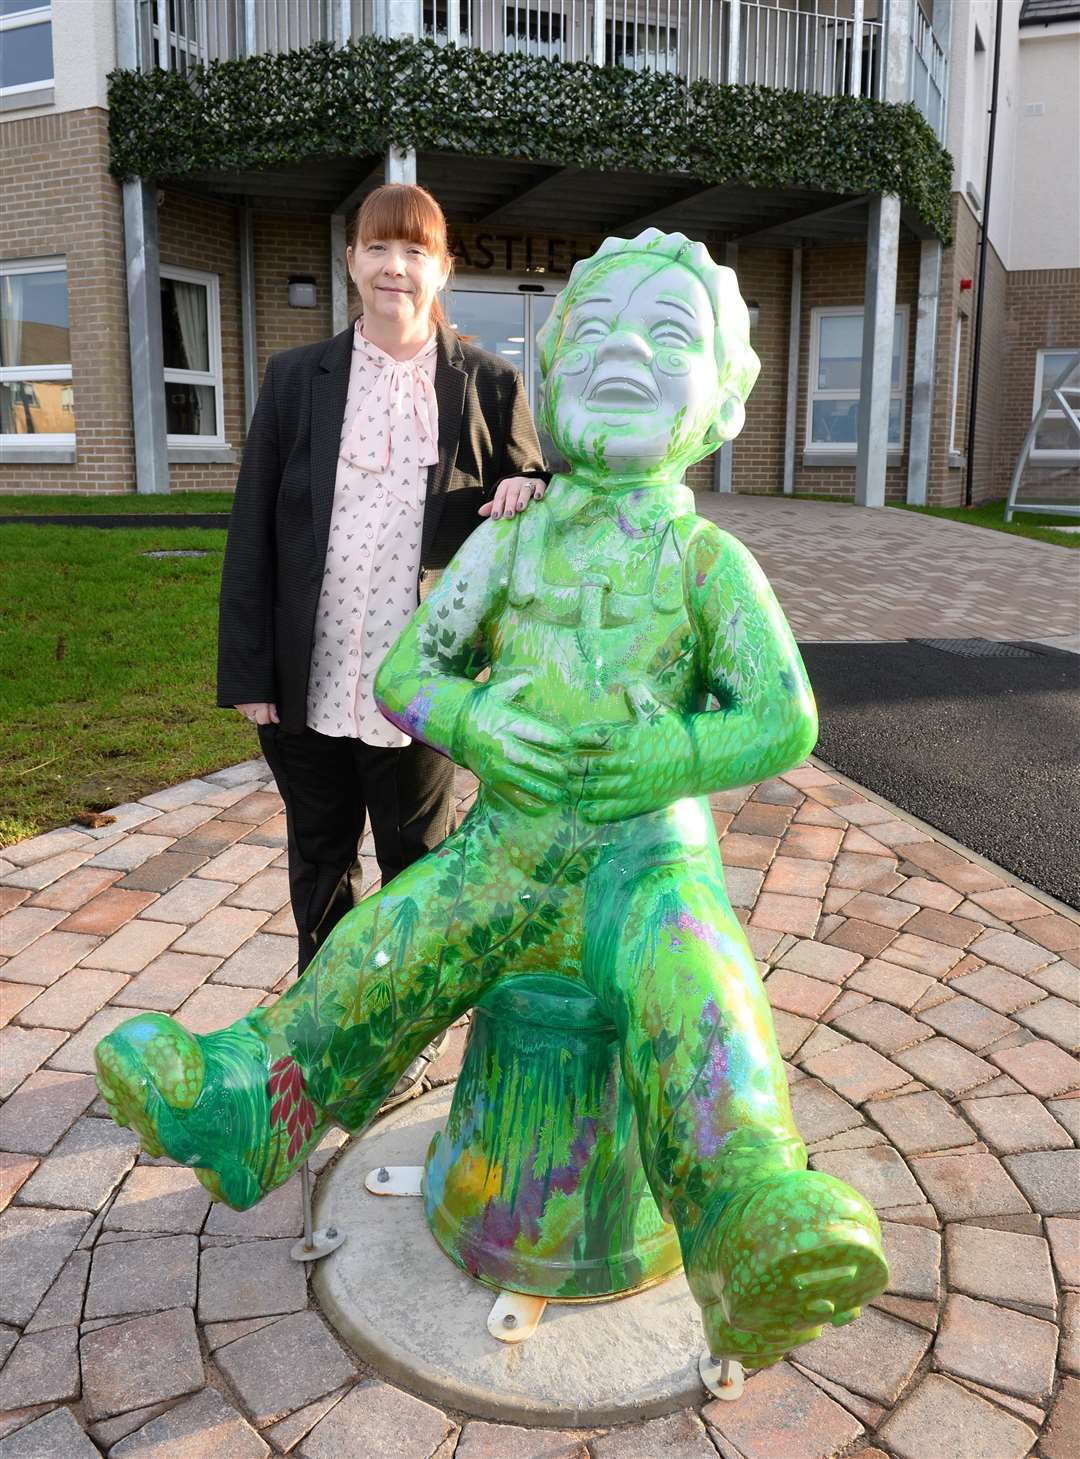 Manager Karen Breen with Oor Wullie at the entrance to the home. Picture: Gary Anthony